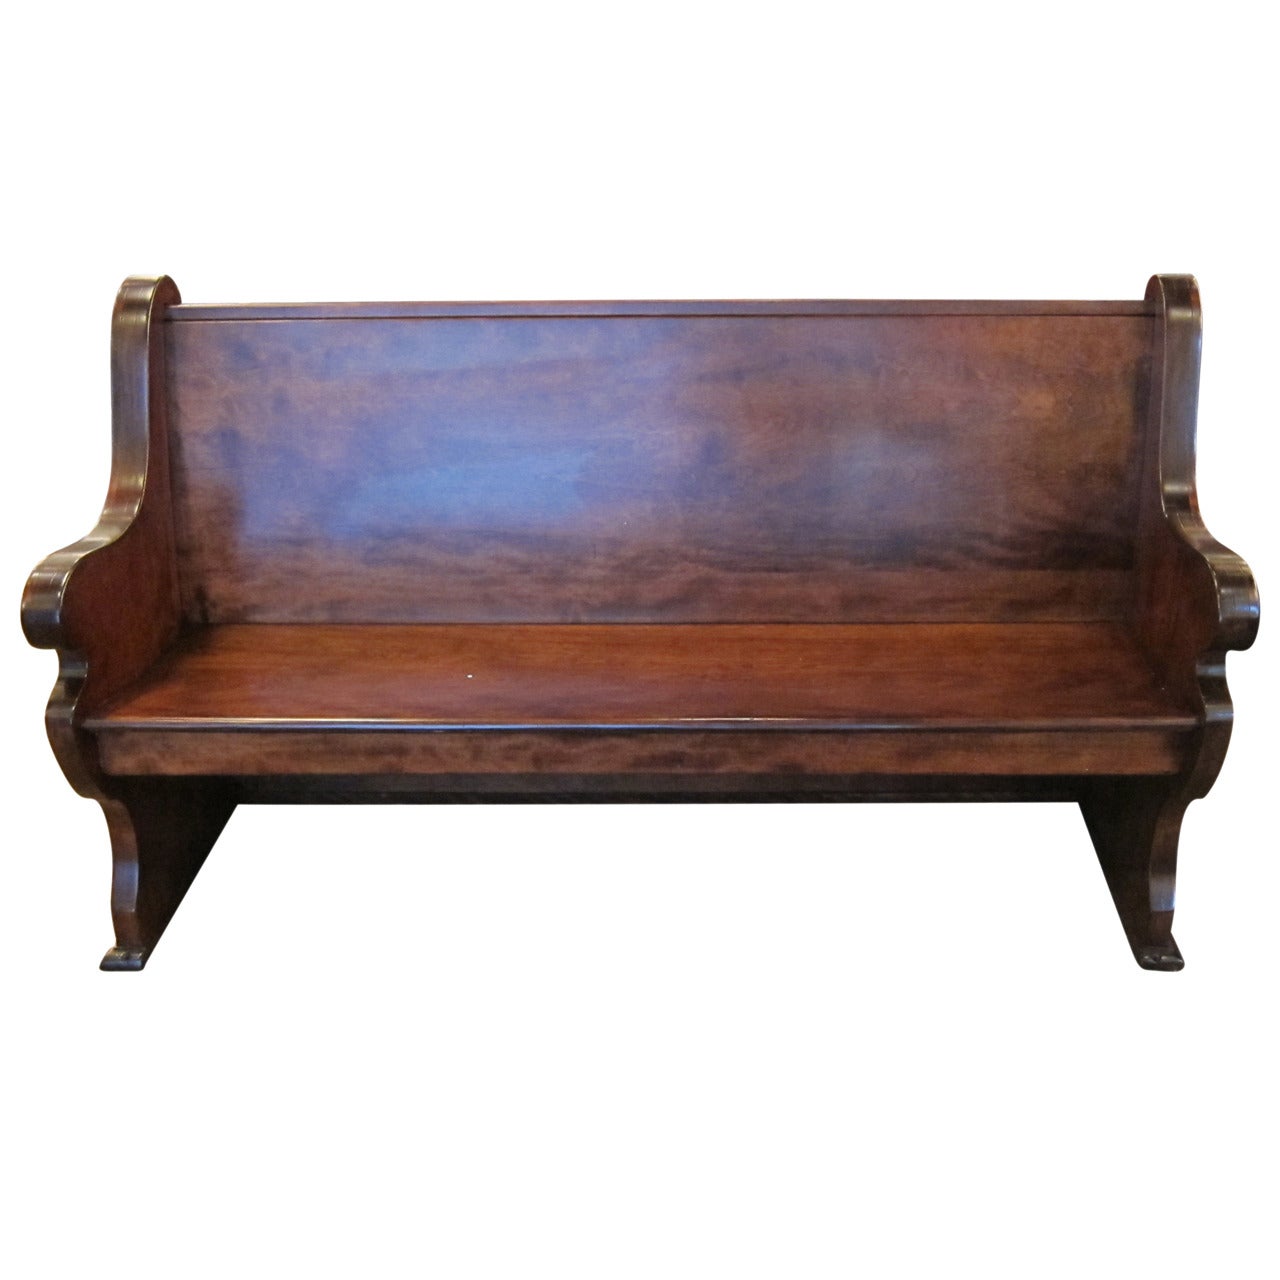 Late 1890s Carved Wooden Church Pew with Full Paneled Back from Brooklyn